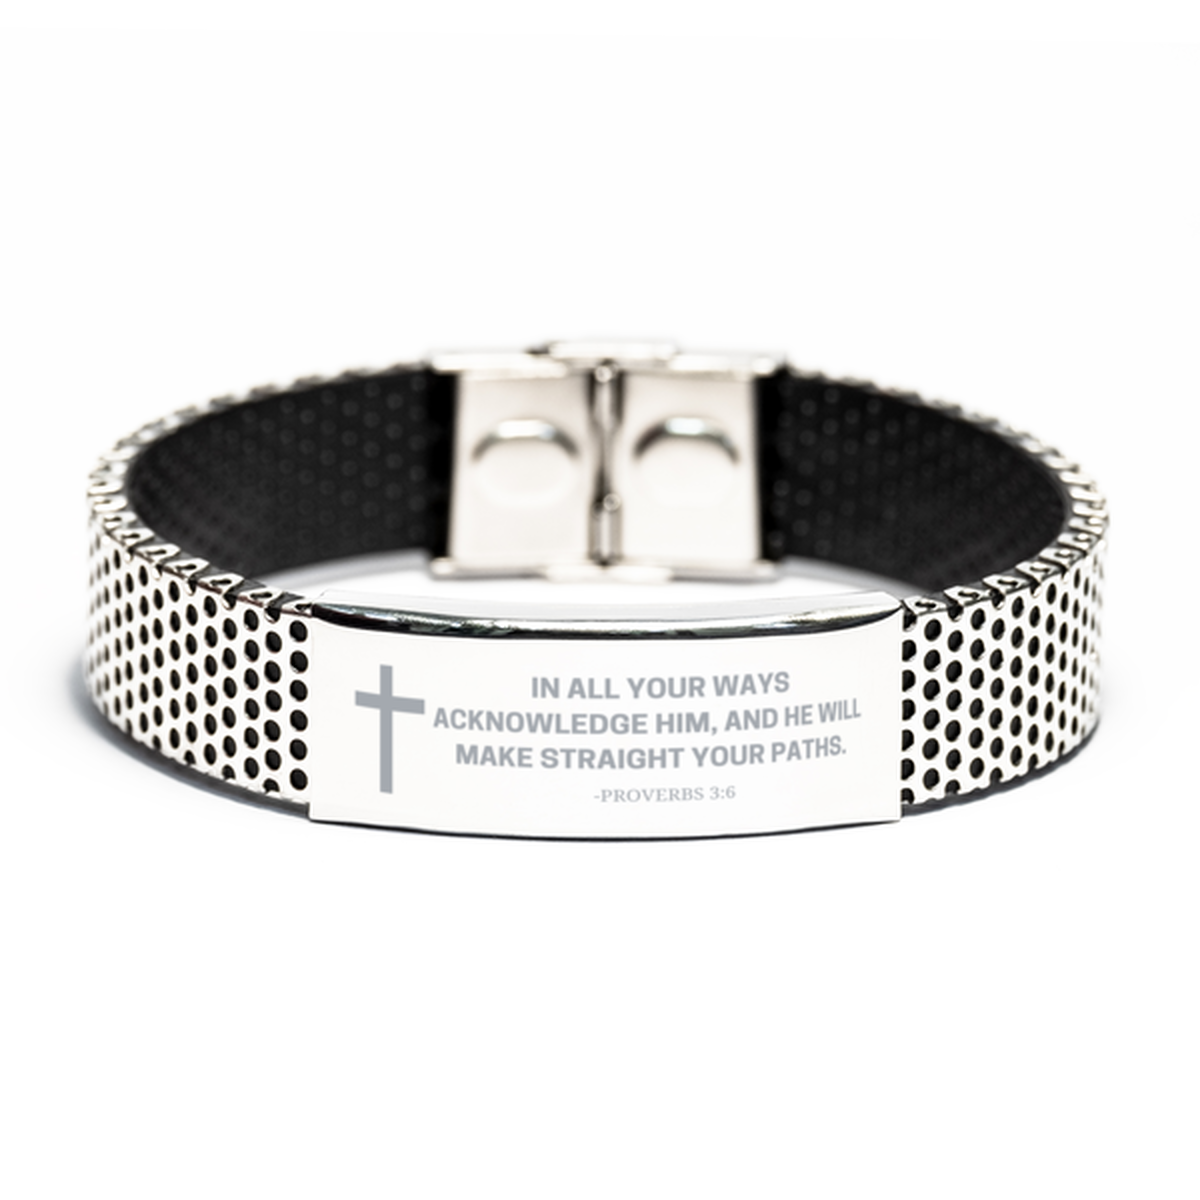 Baptism Gifts For Teenage Boys Girls, Christian Bible Verse Stainless Steel Bracelet, In all your ways acknowledge Him, Catholic Confirmation Gifts for Son, Godson, Grandson, Nephew